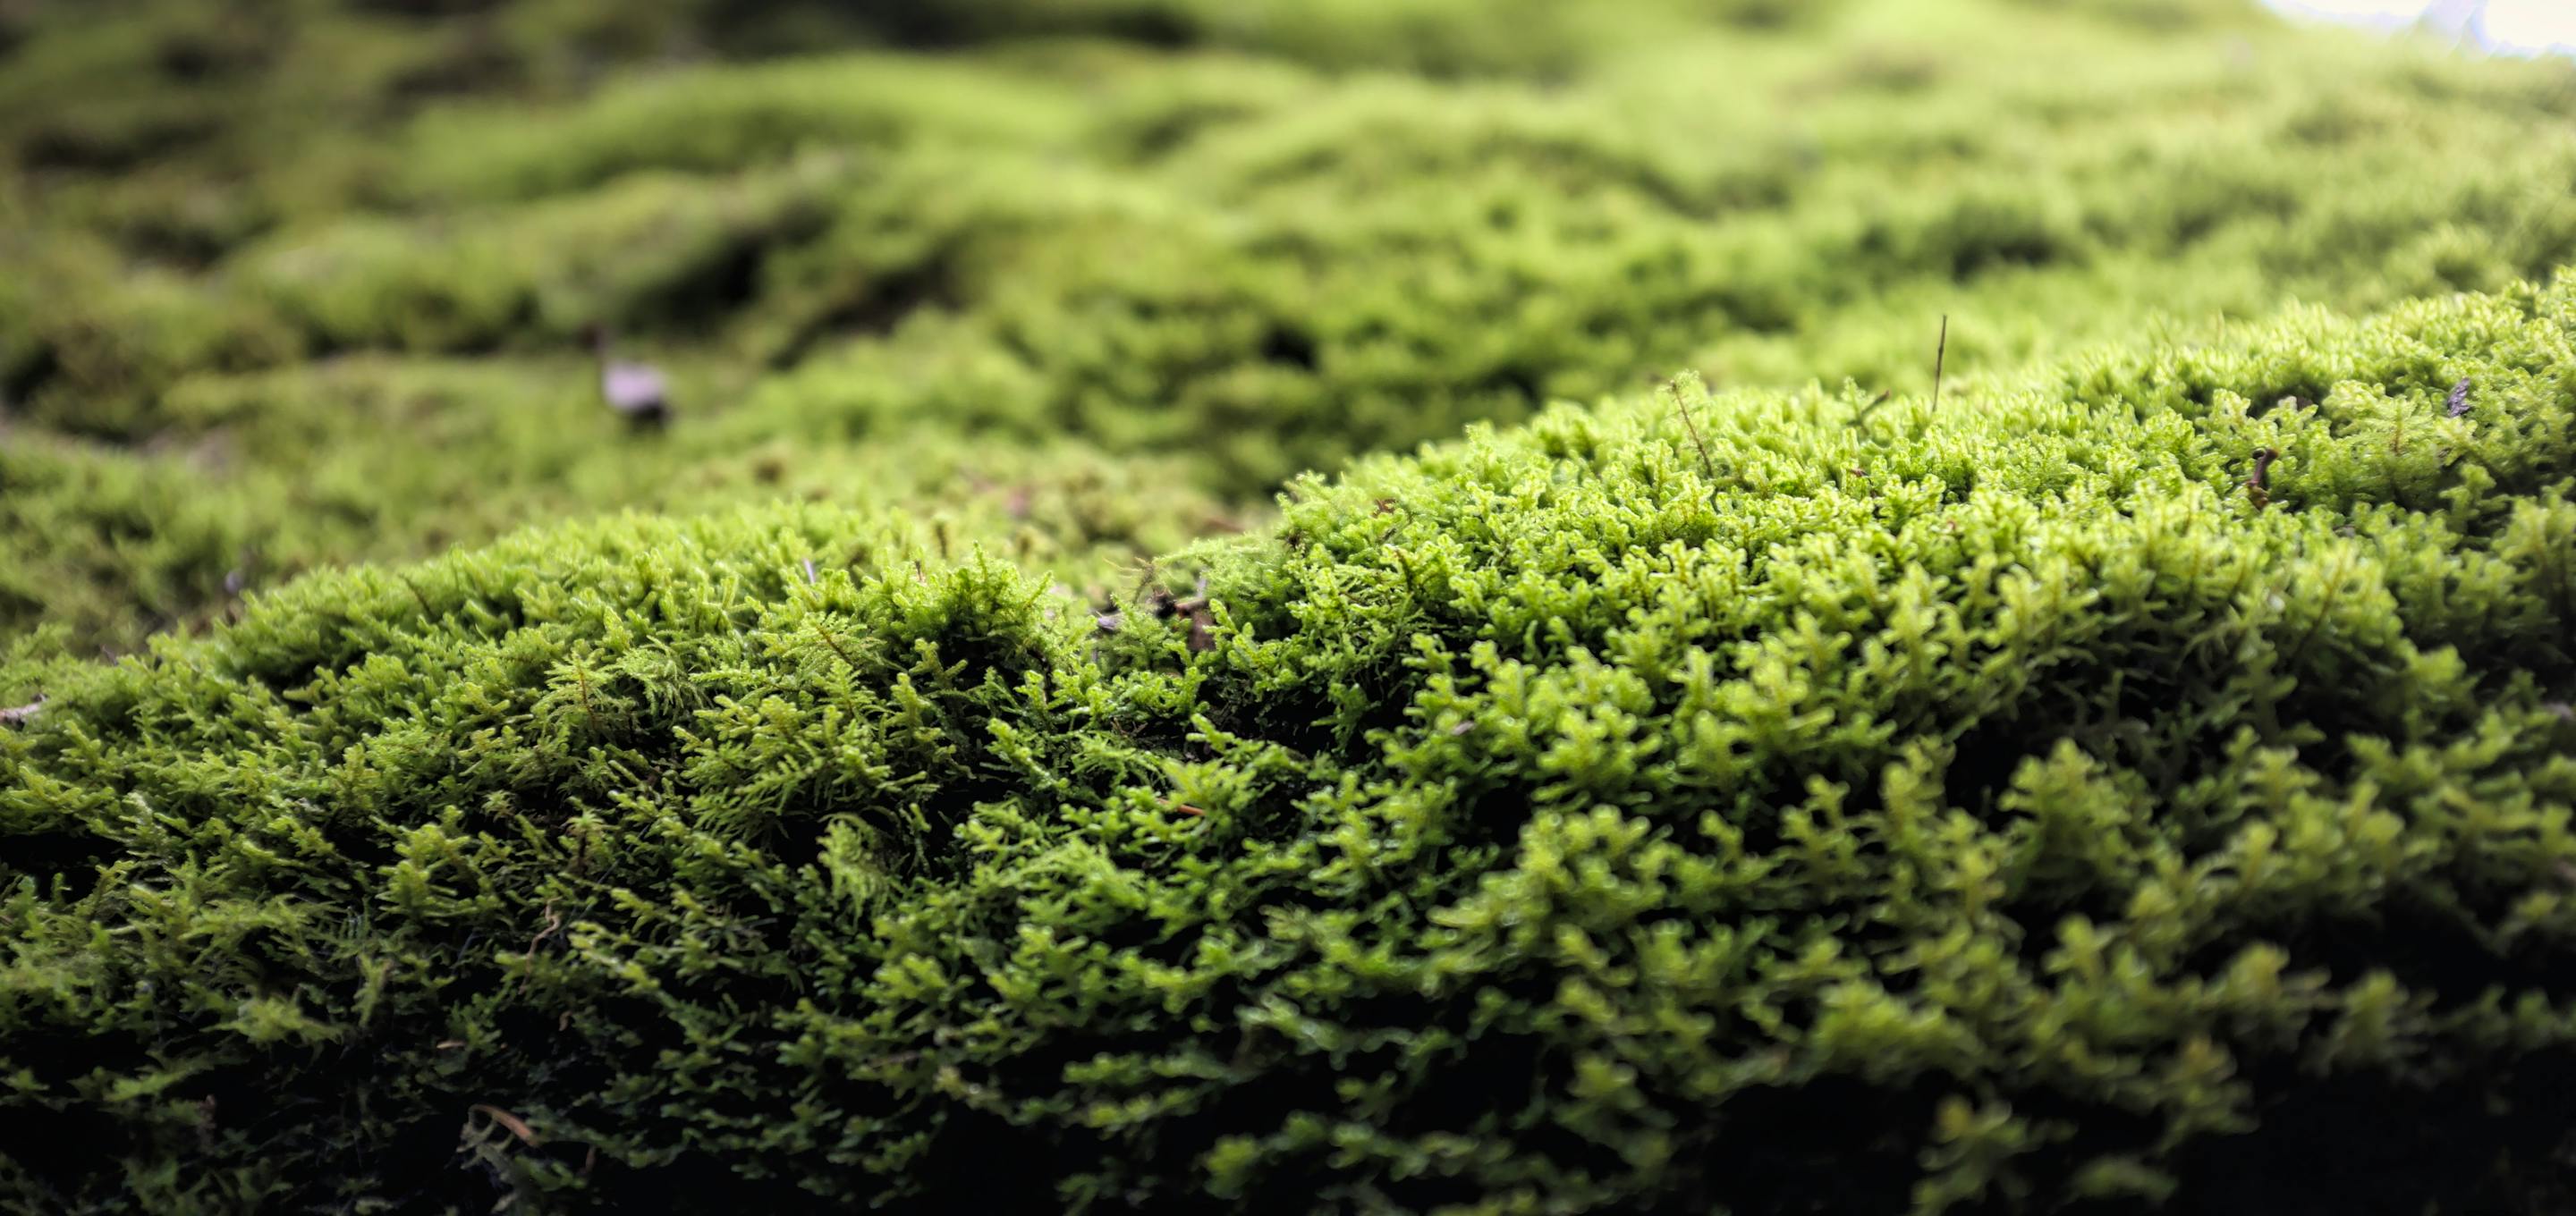 Vibrant green moss in the daylight